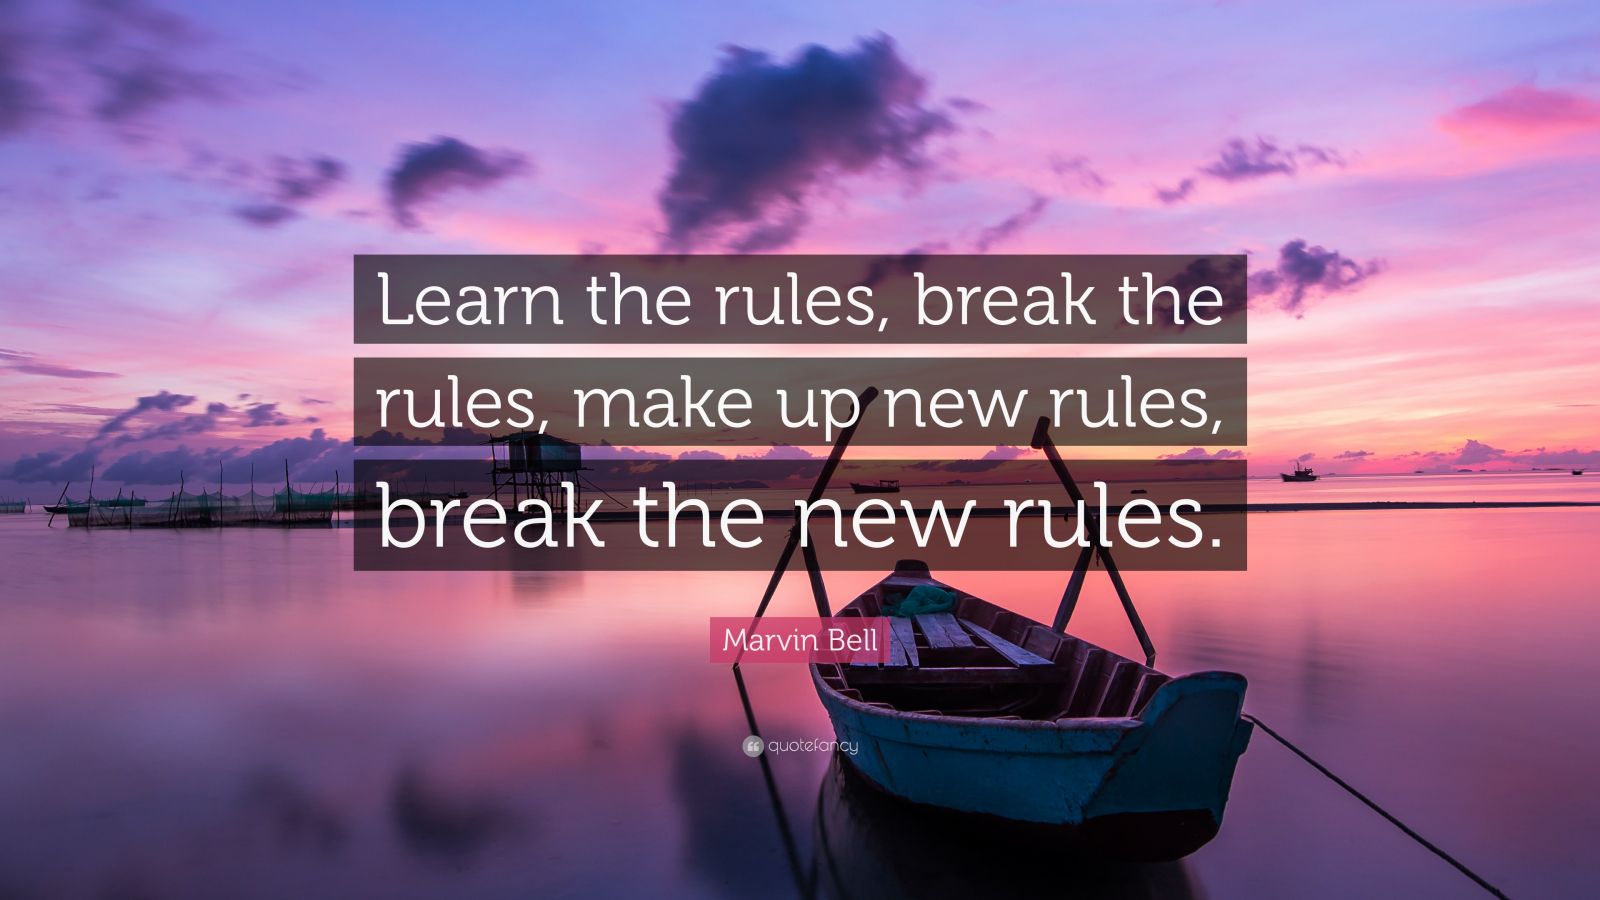 Marvin Bell Quote: "Learn the rules, break the rules, make up new rules, break the new rules ...